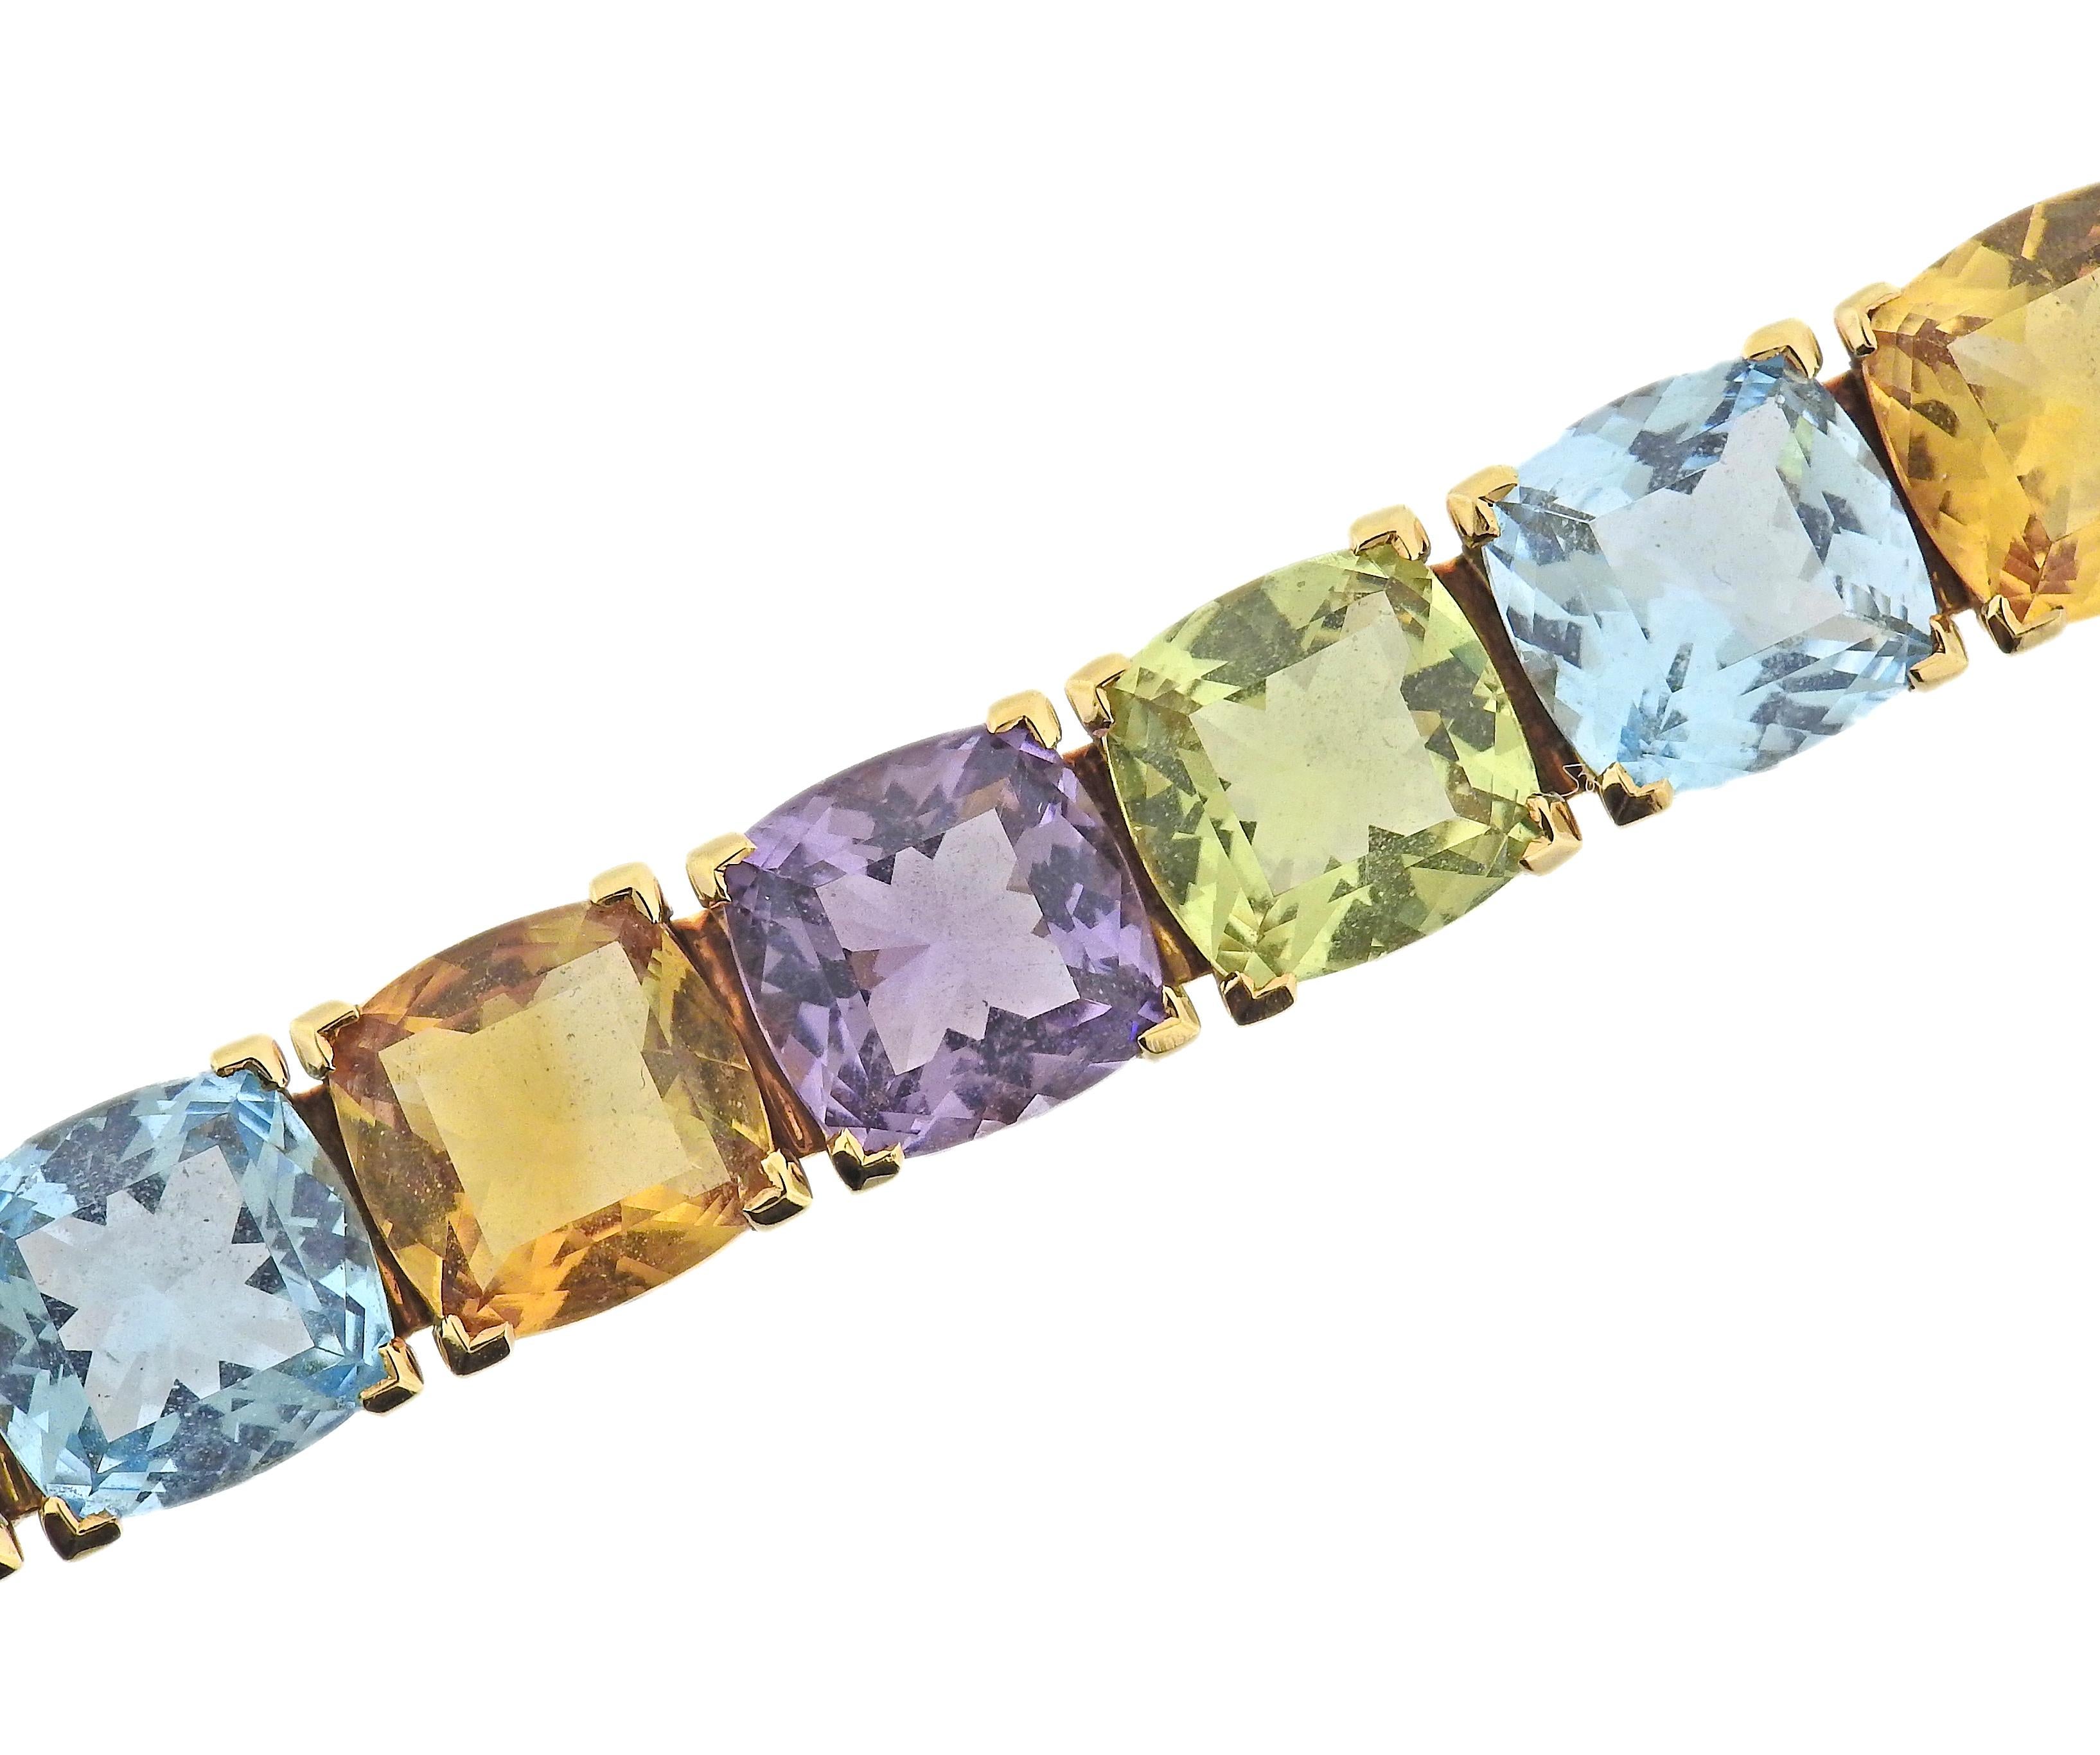 18k gold bracelet by Asprey, featuring topaz, citrine, peridot and amethyst. Come with box.  Bracelet is 7 2/8